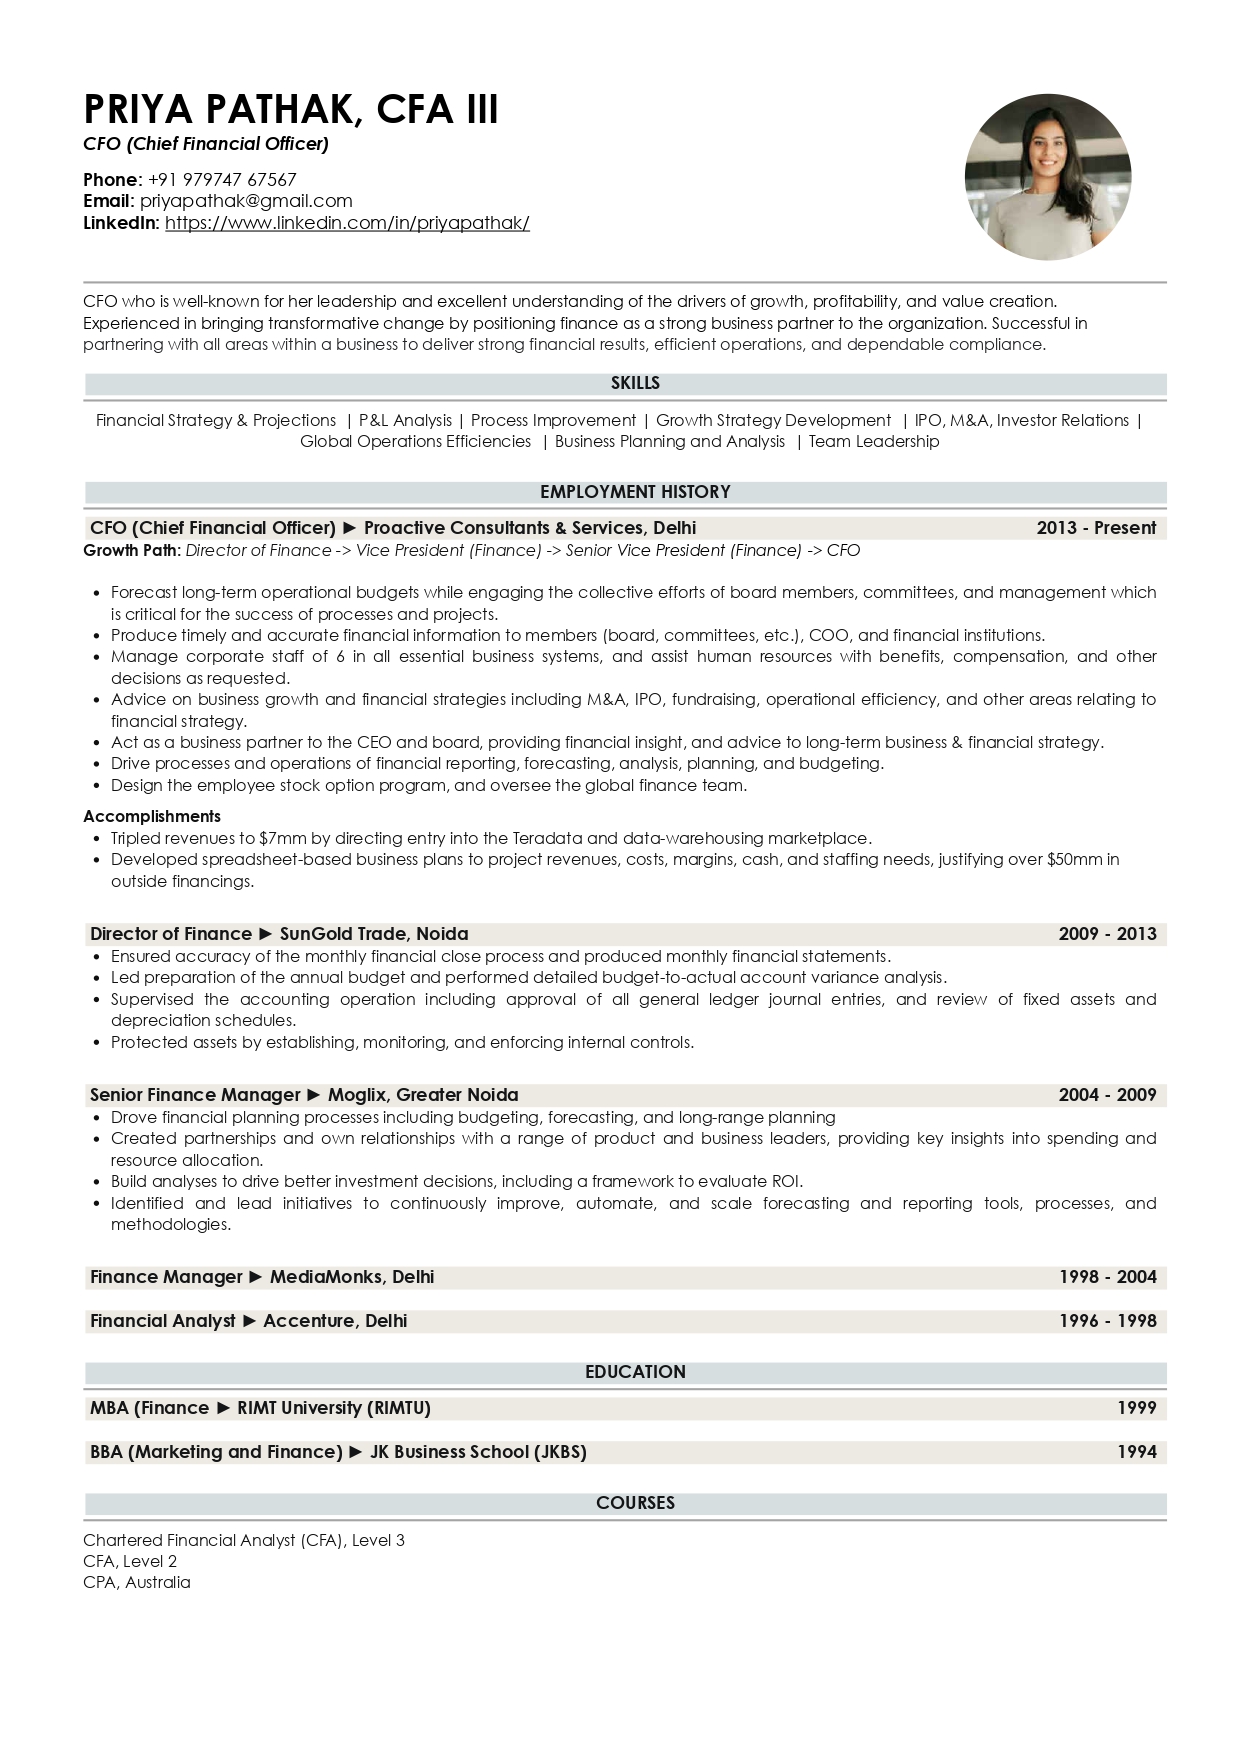 Sample Resume of Chief Financial Officer (CFO) | Free Resume Templates & Samples on Resumod.co